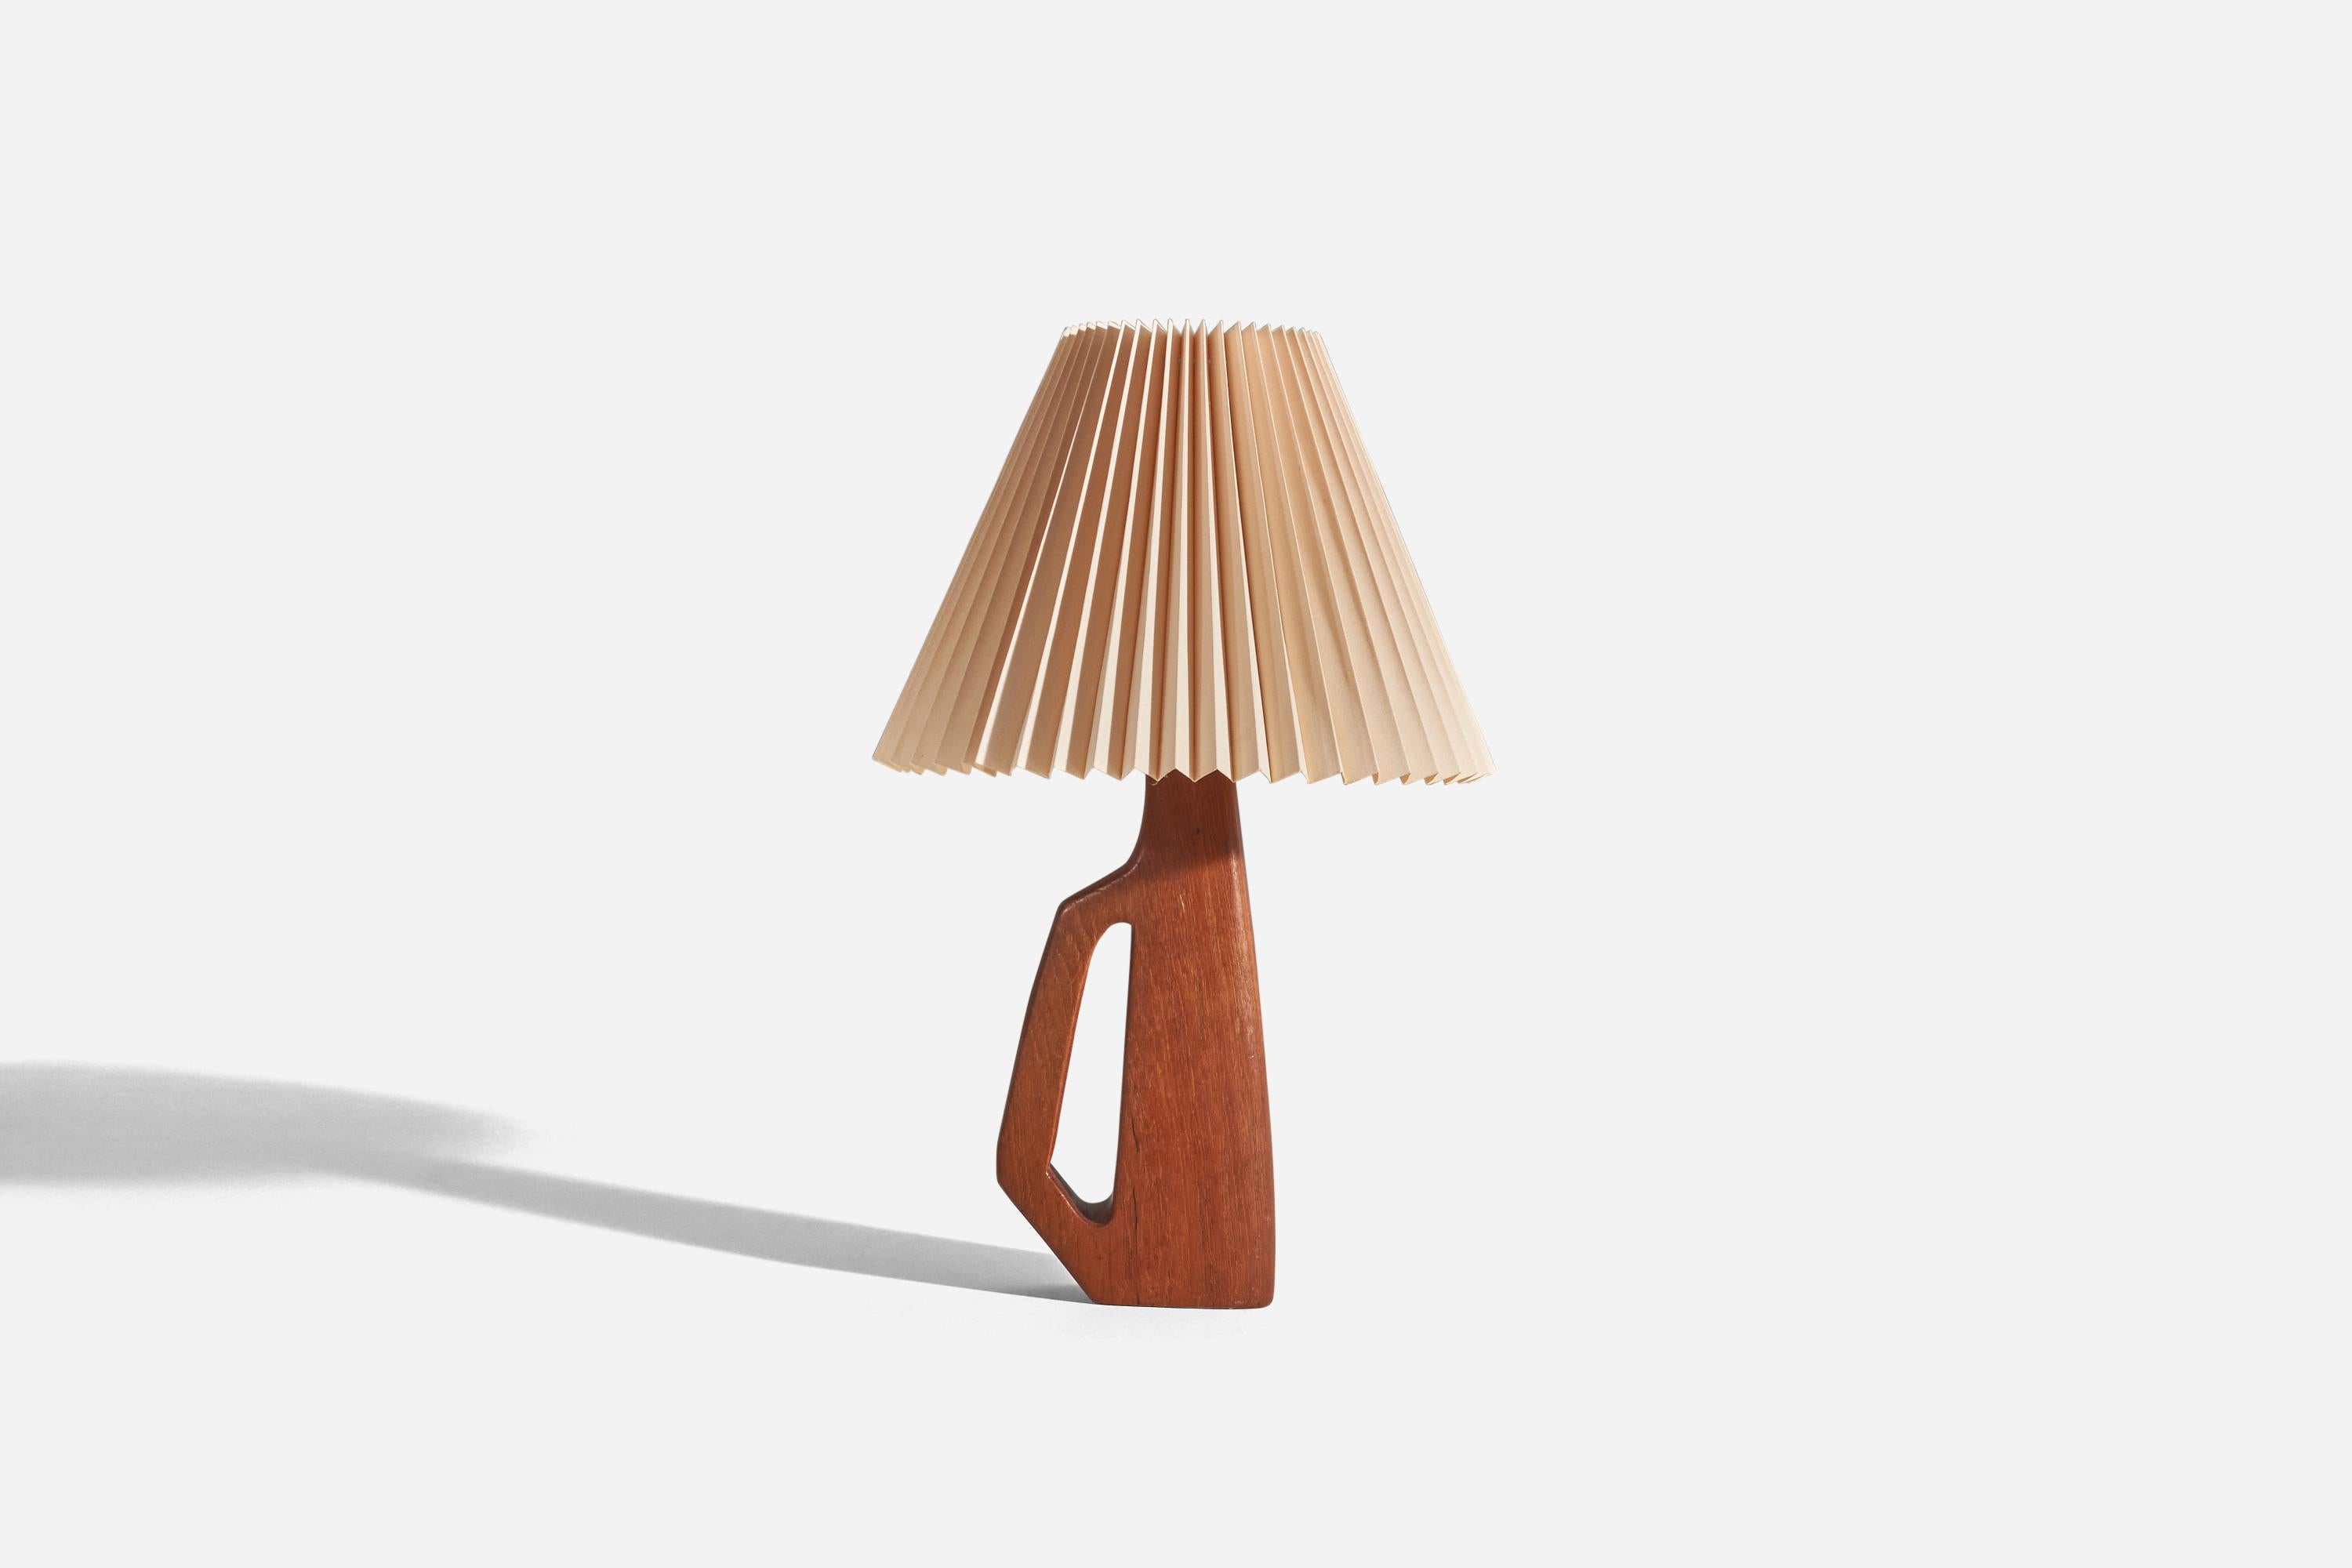 A teak and paper table lamp designed and produced in Sweden, c. 1960s.

Sold with lampshade. 
Dimensions of lamp (inches) : 11.75 x 5 x 2.72 (Height x Width x Depth)
Dimensions of shade (inches) : 4.62 x 11 x 8.25 (Top Diameter x Bottom Diameter